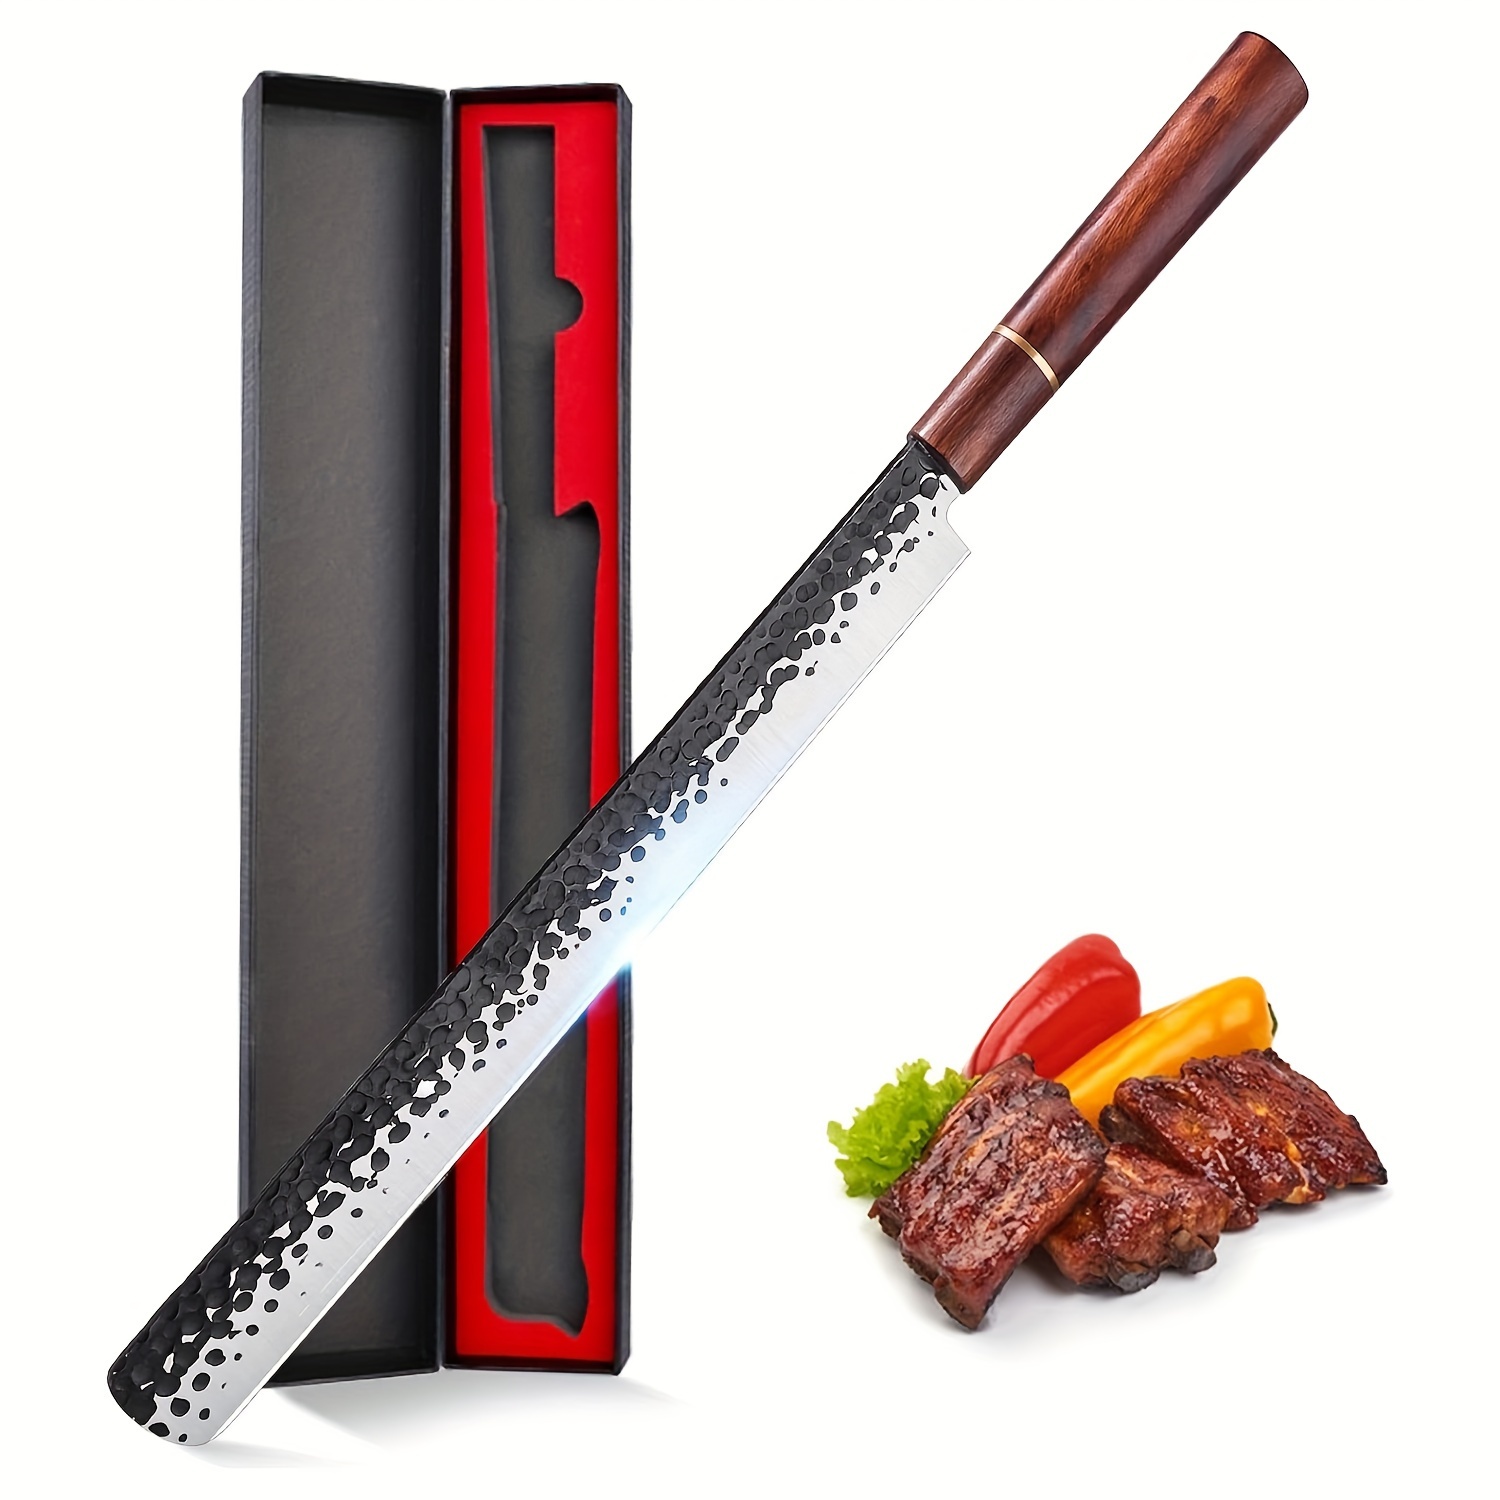 

11 Inch Brisket Knife, Slicing Carving Knife For Meat Cutting Hand Forged Ultra Sharp Meat Slicer Wood Handle For Bbq Grilling Roast With Gift Box